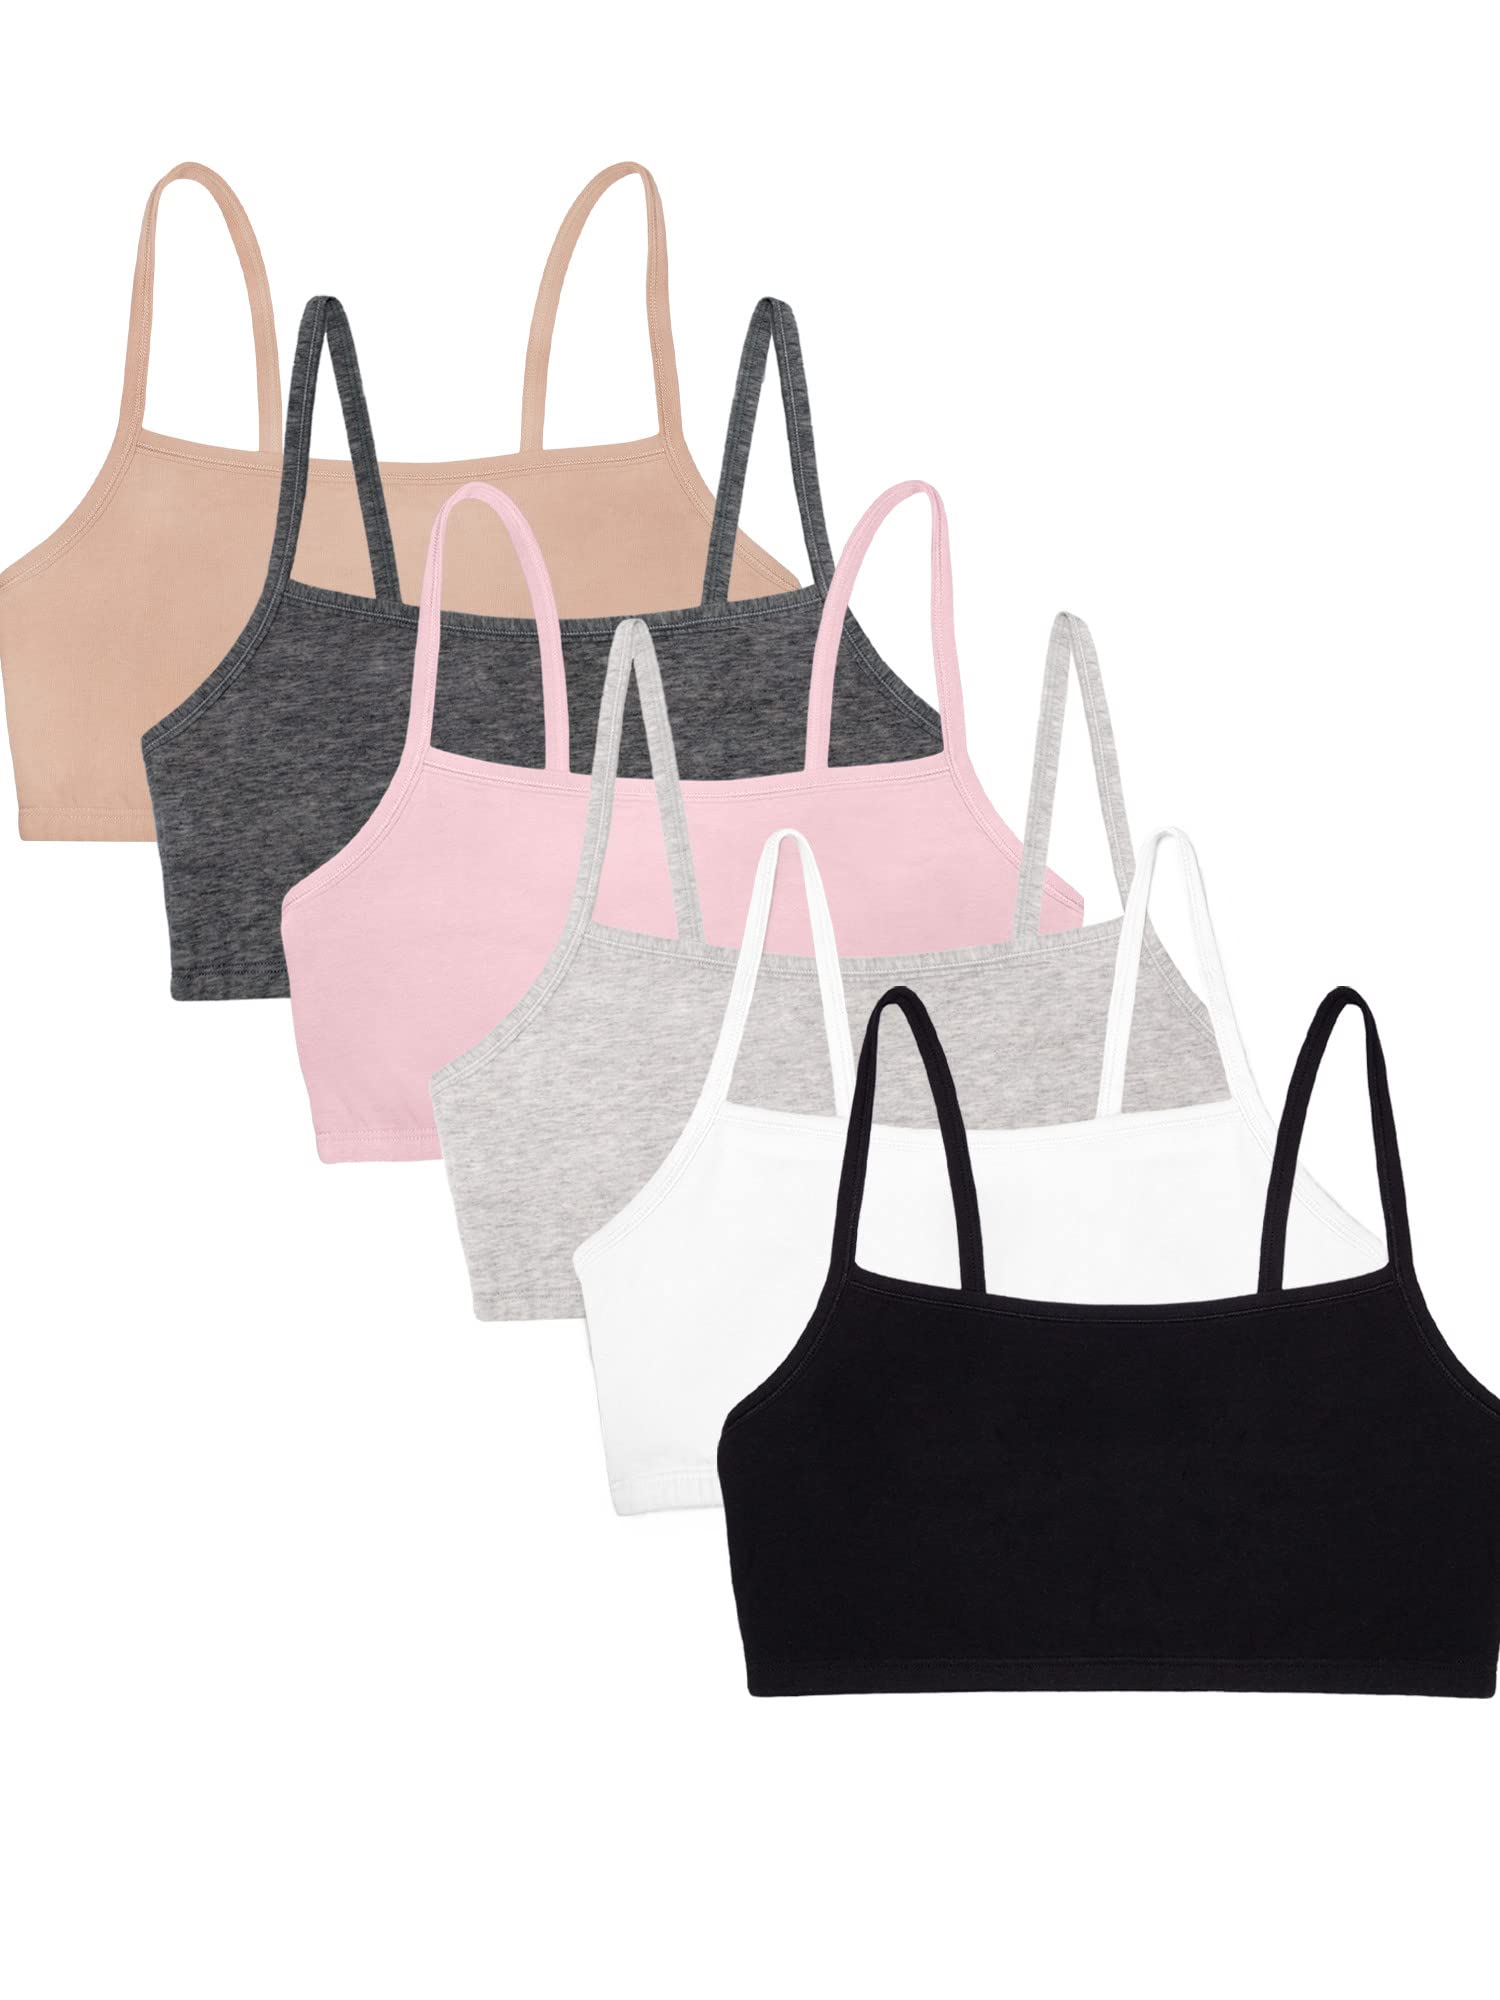 Fruit of the Loom Women's Spaghetti Strap Cotton Pullover Sports Bra Value Pack